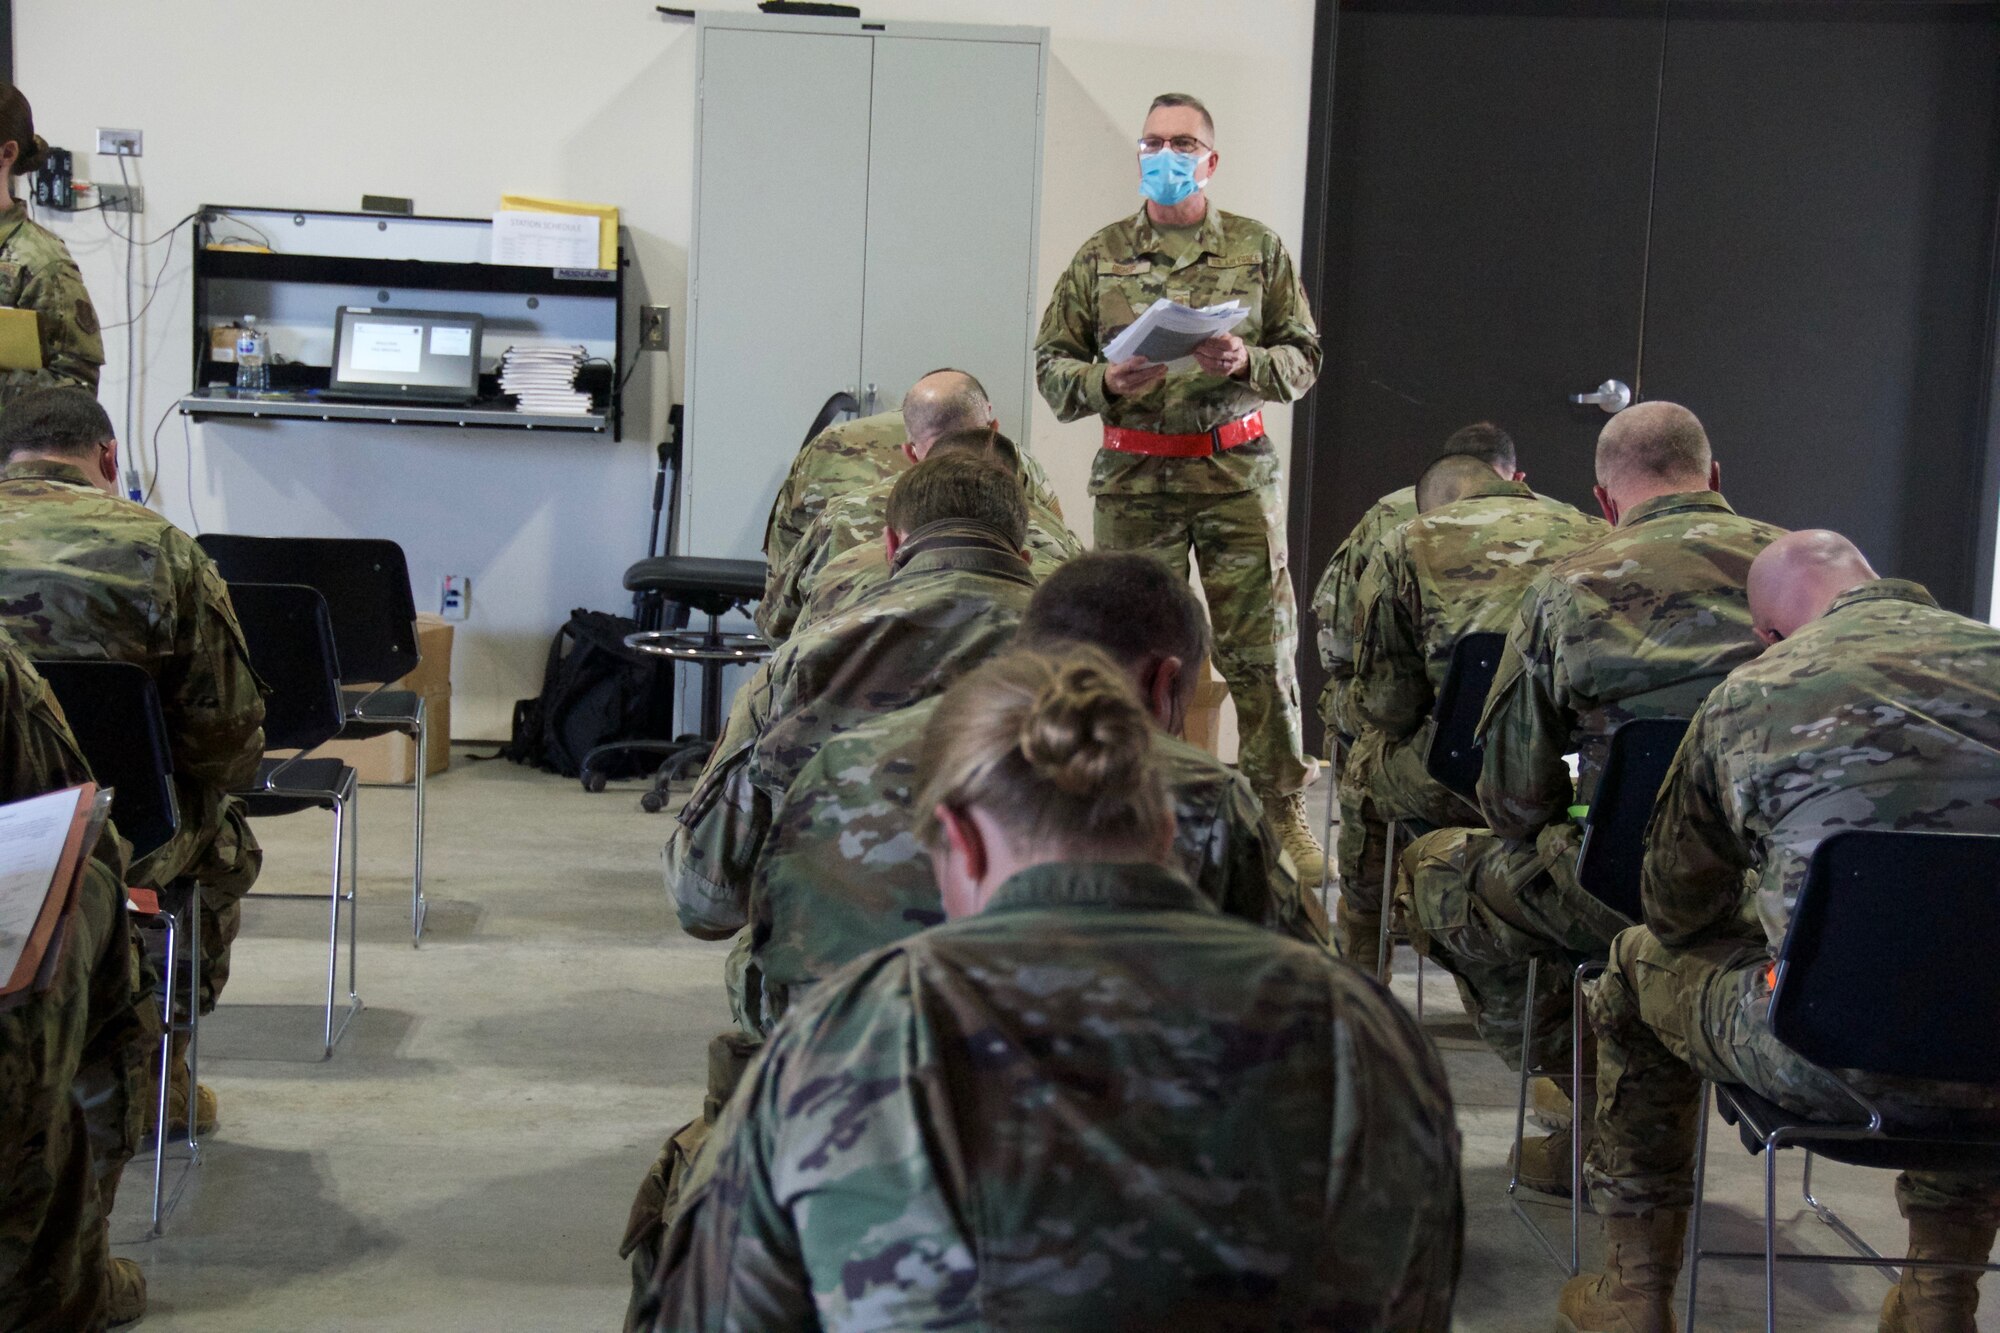 Airmen from the 174th Attack Wing, Syracuse, New York, participate in a wing readiness exercise April 10-15, 2021. This exercise prepares airmen for deployments. (U.S. Air National Guard photo by Staff Sgt. Megan Fowler)